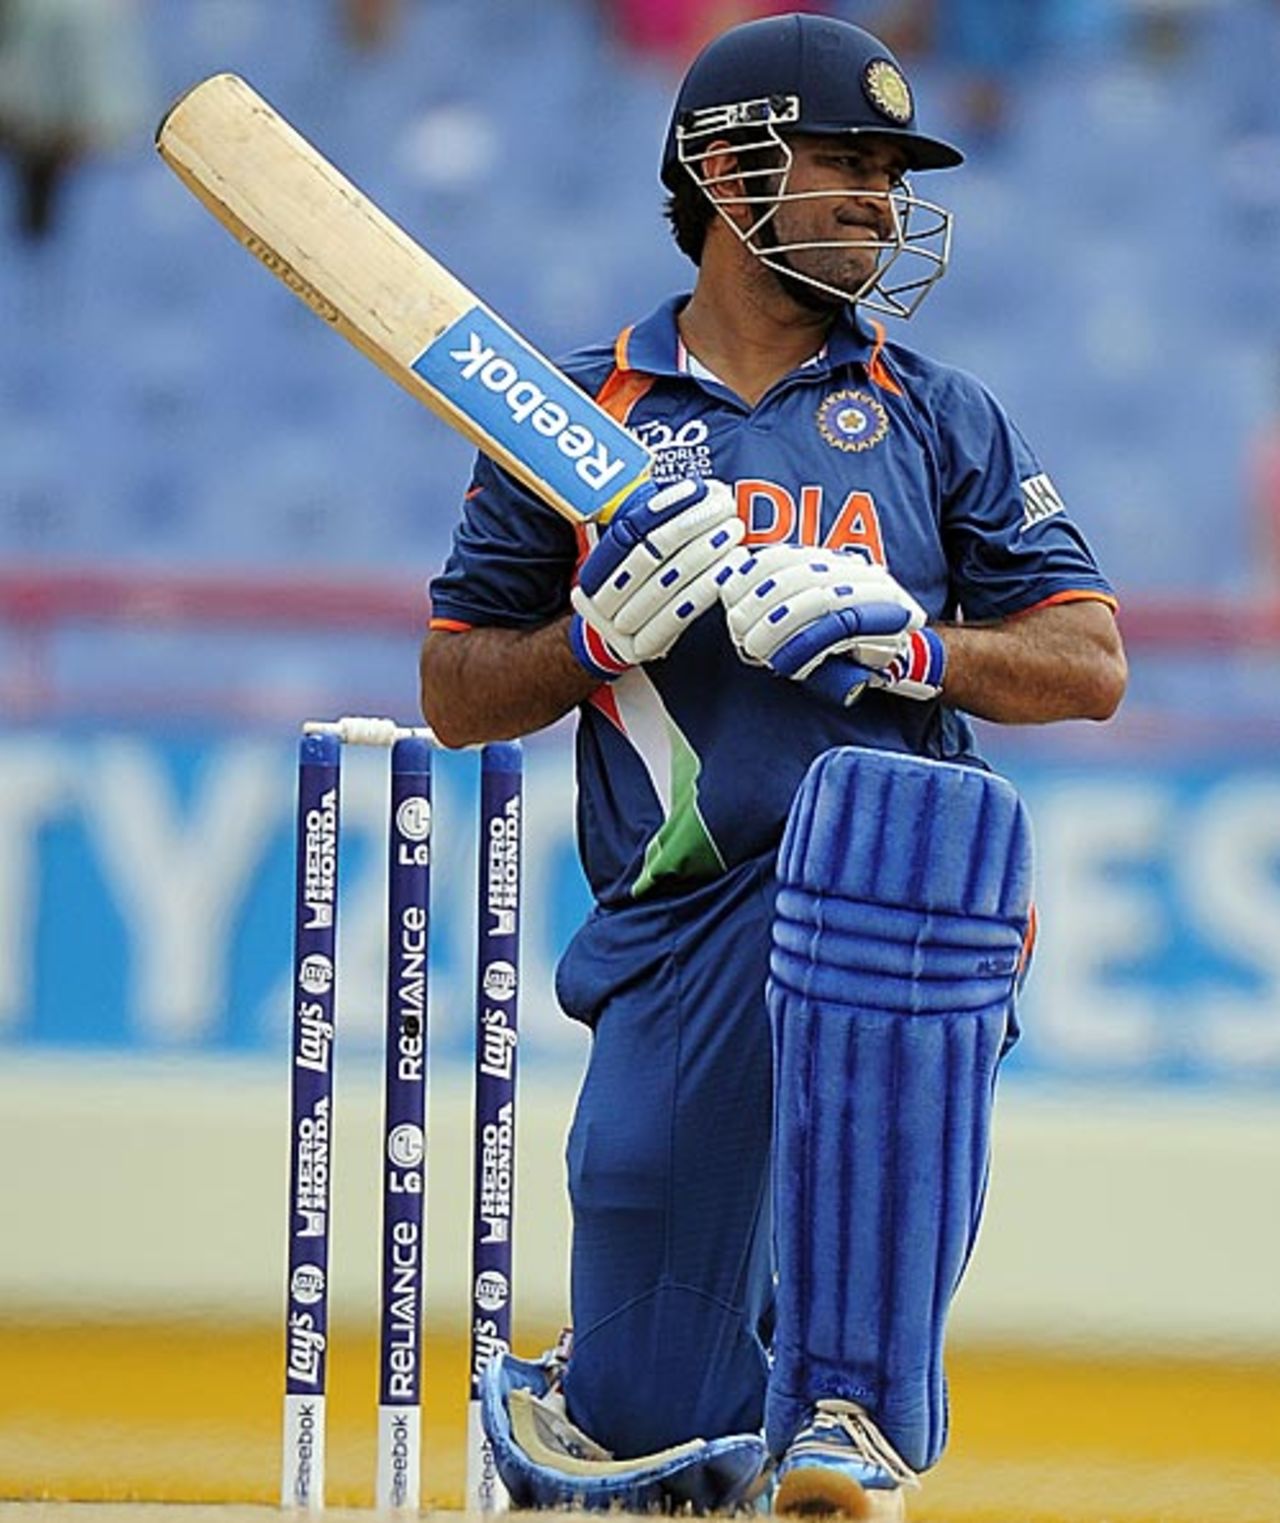 MS Dhoni was contained by Sri Lanka's bowlers, Sri Lanka v India, Group F, World Twenty20, St Lucia, May 11, 2010